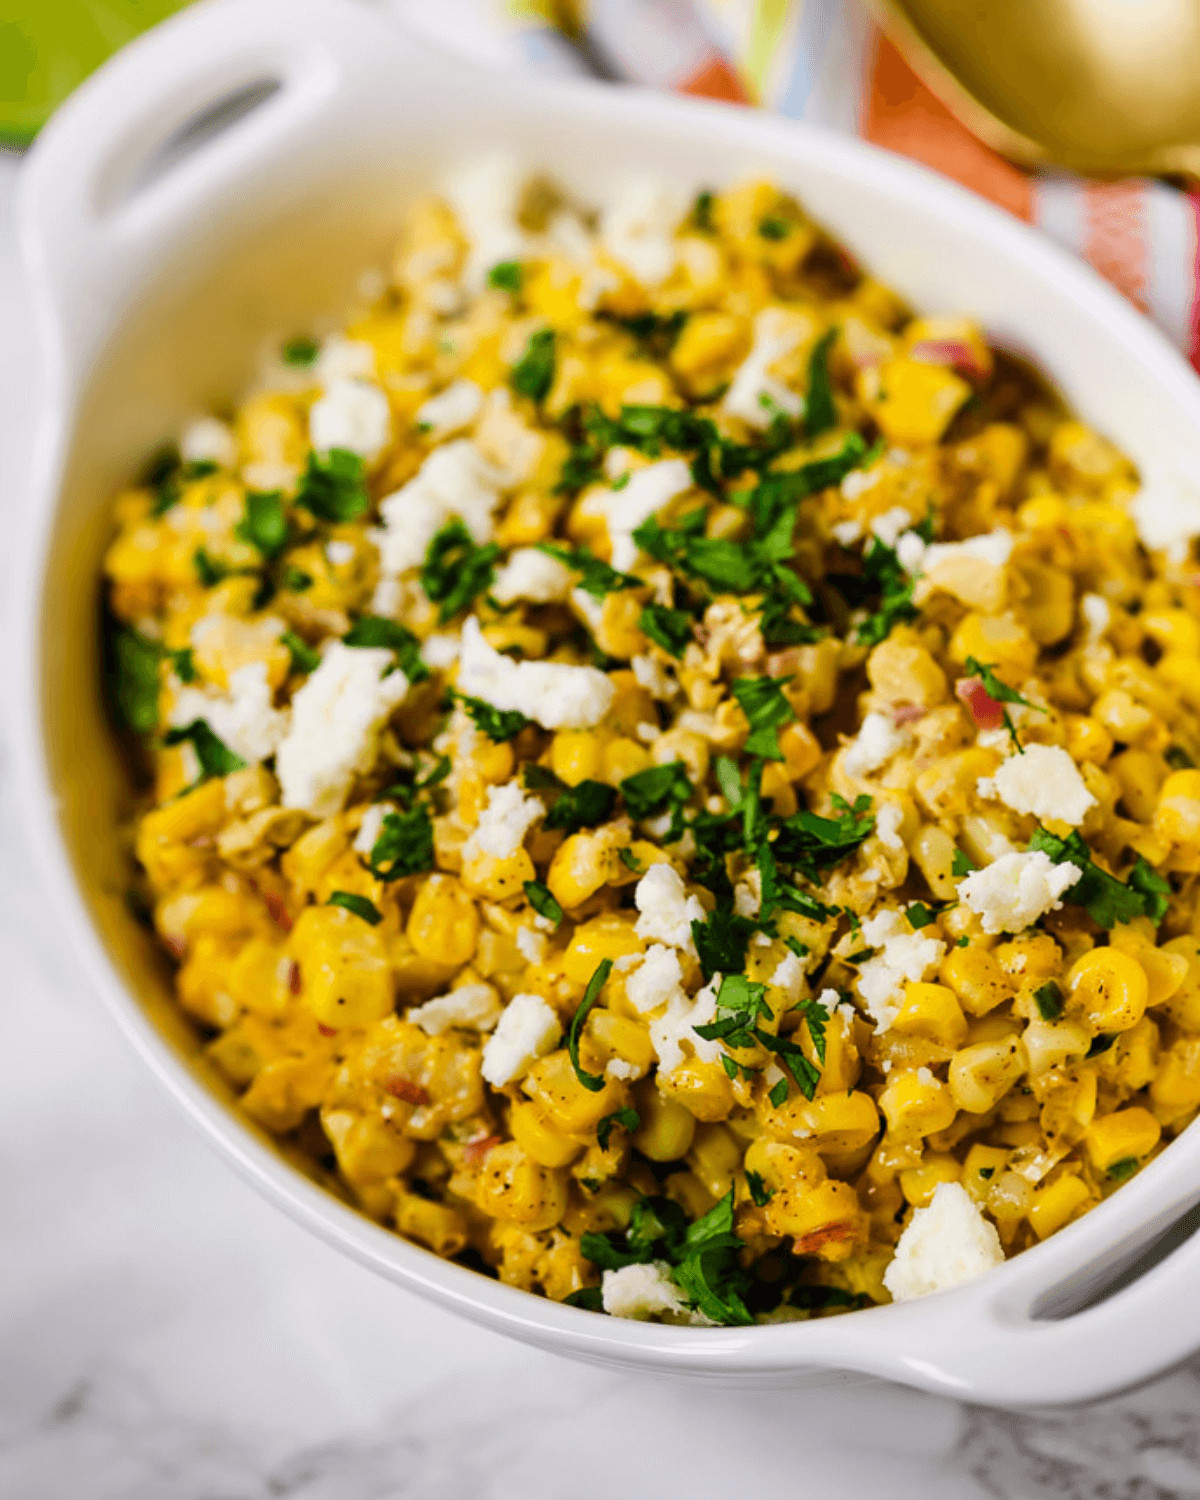 A Mexican corn salad garnished with herbs and crumbled cheese.